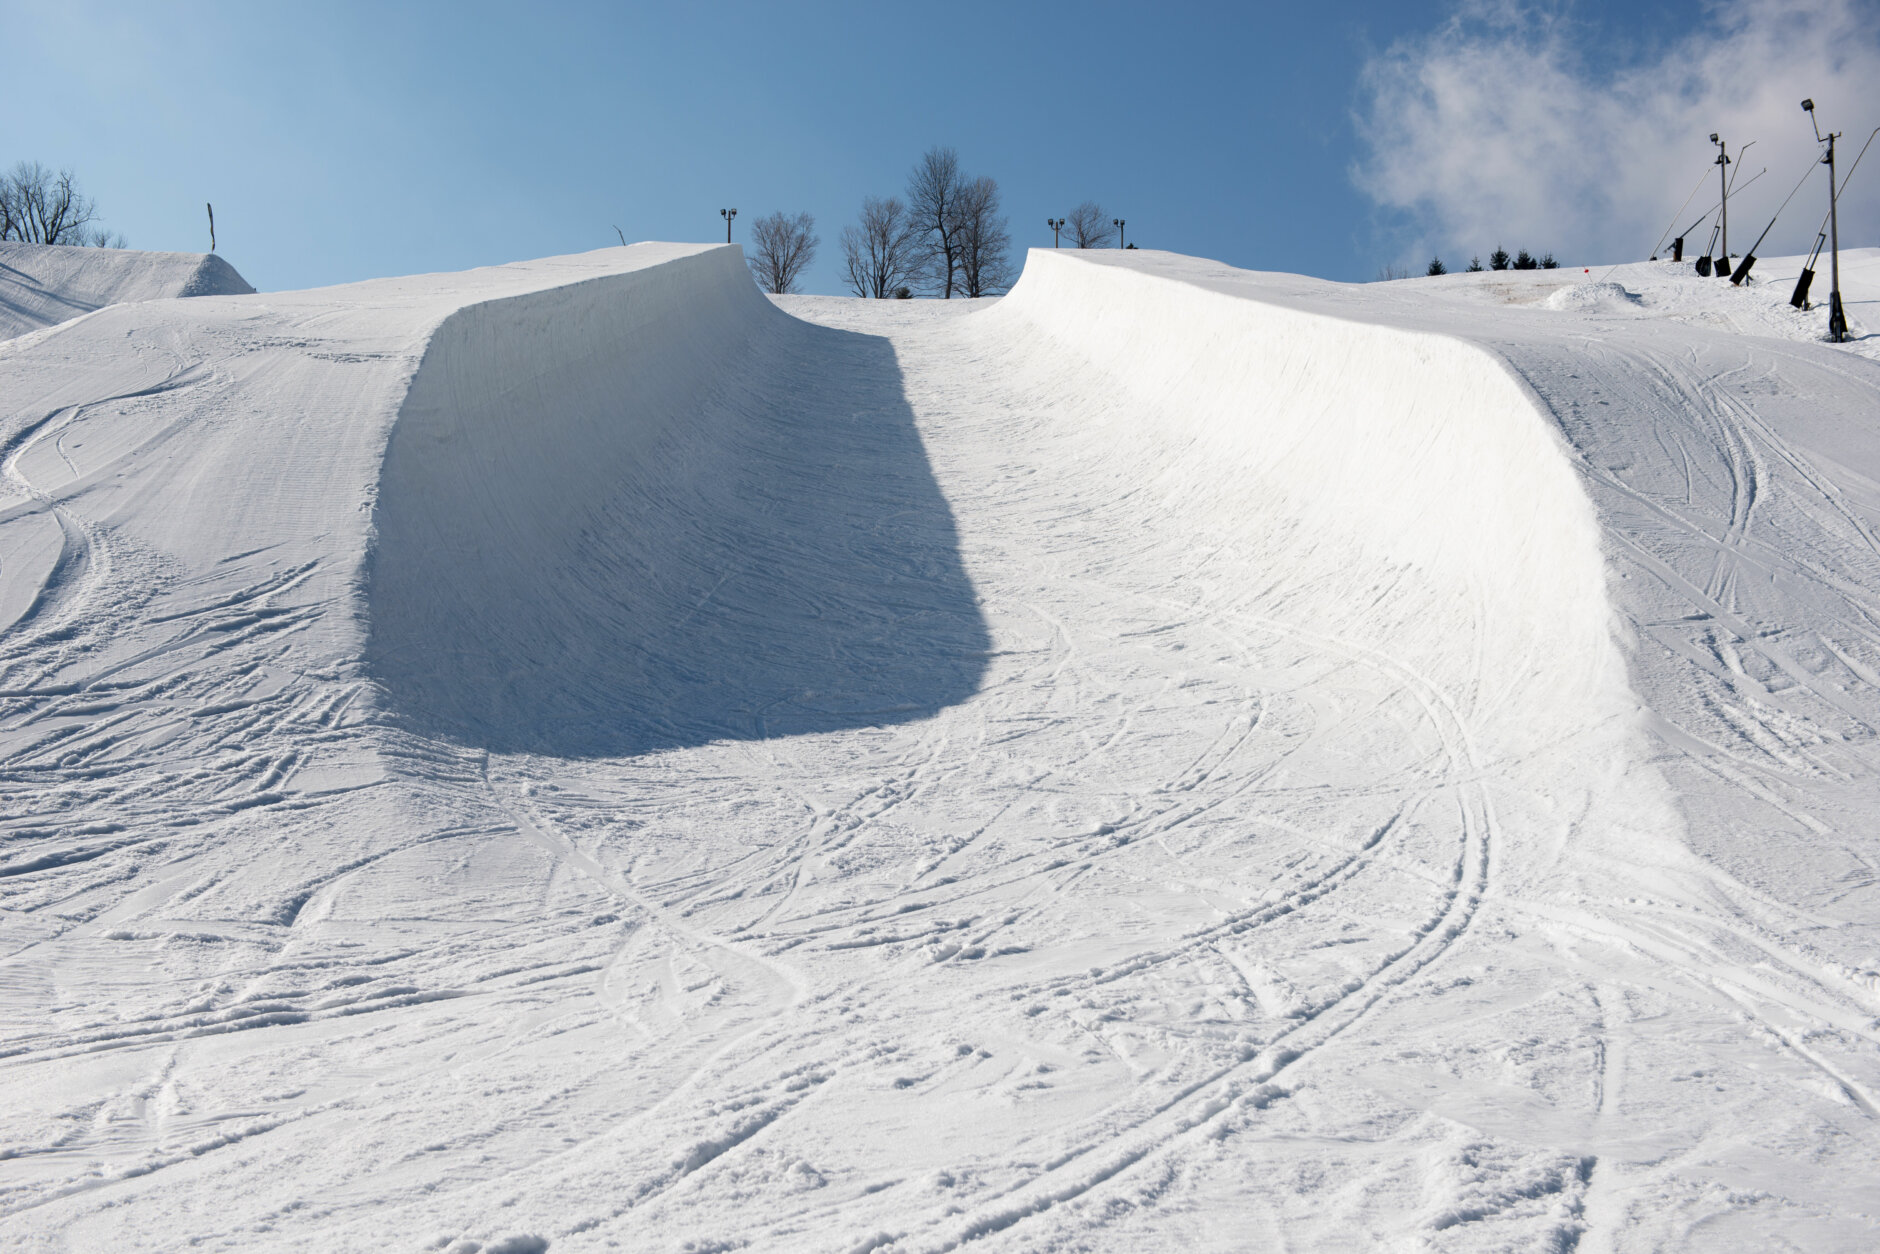 Olympic sized Halfpipe for skiers and snowboarders to prepare for olympics